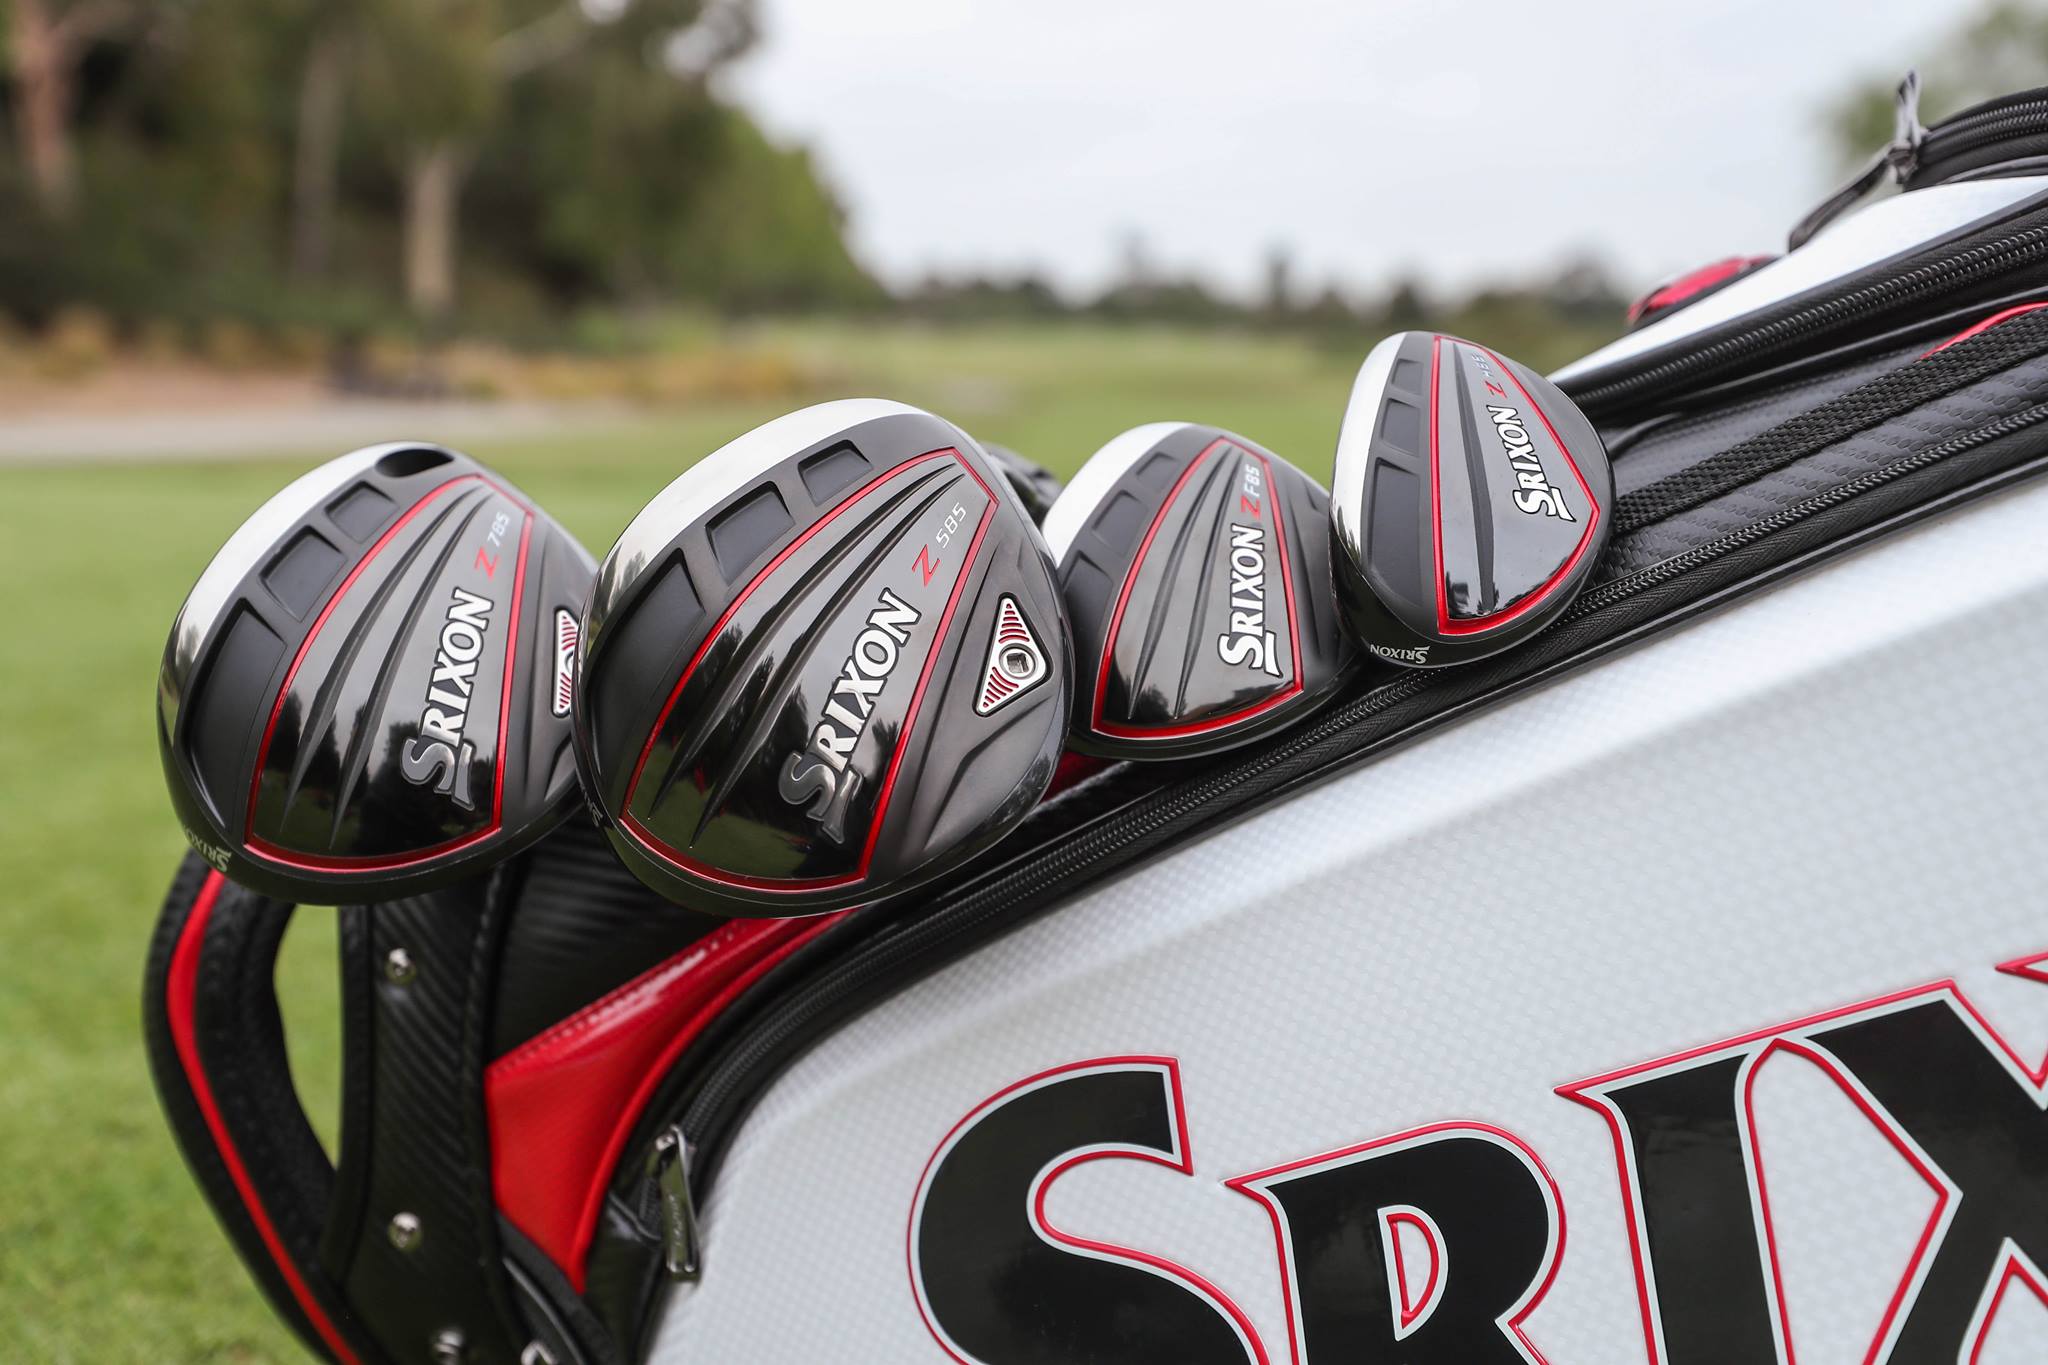 Srixon Golf Demo Day at Broad Run Golf and Practice Center